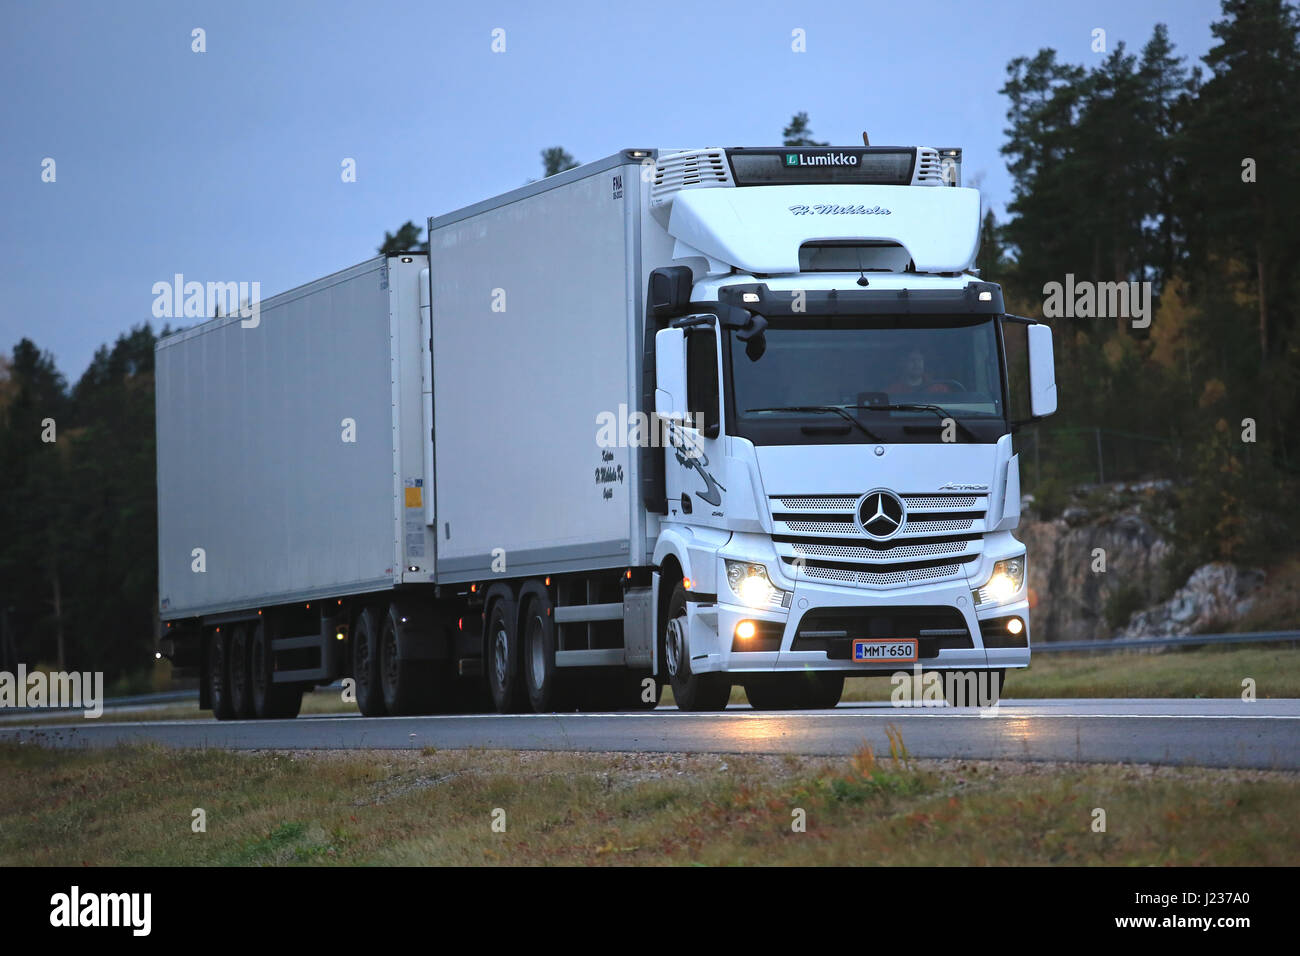 PAIMIO, FINLAND - OCTOBER 14, 2016: White Mercedes-Benz Actros 2545 reefer truck of H. Mikkola transports goods along motorway late in the evening. Stock Photo